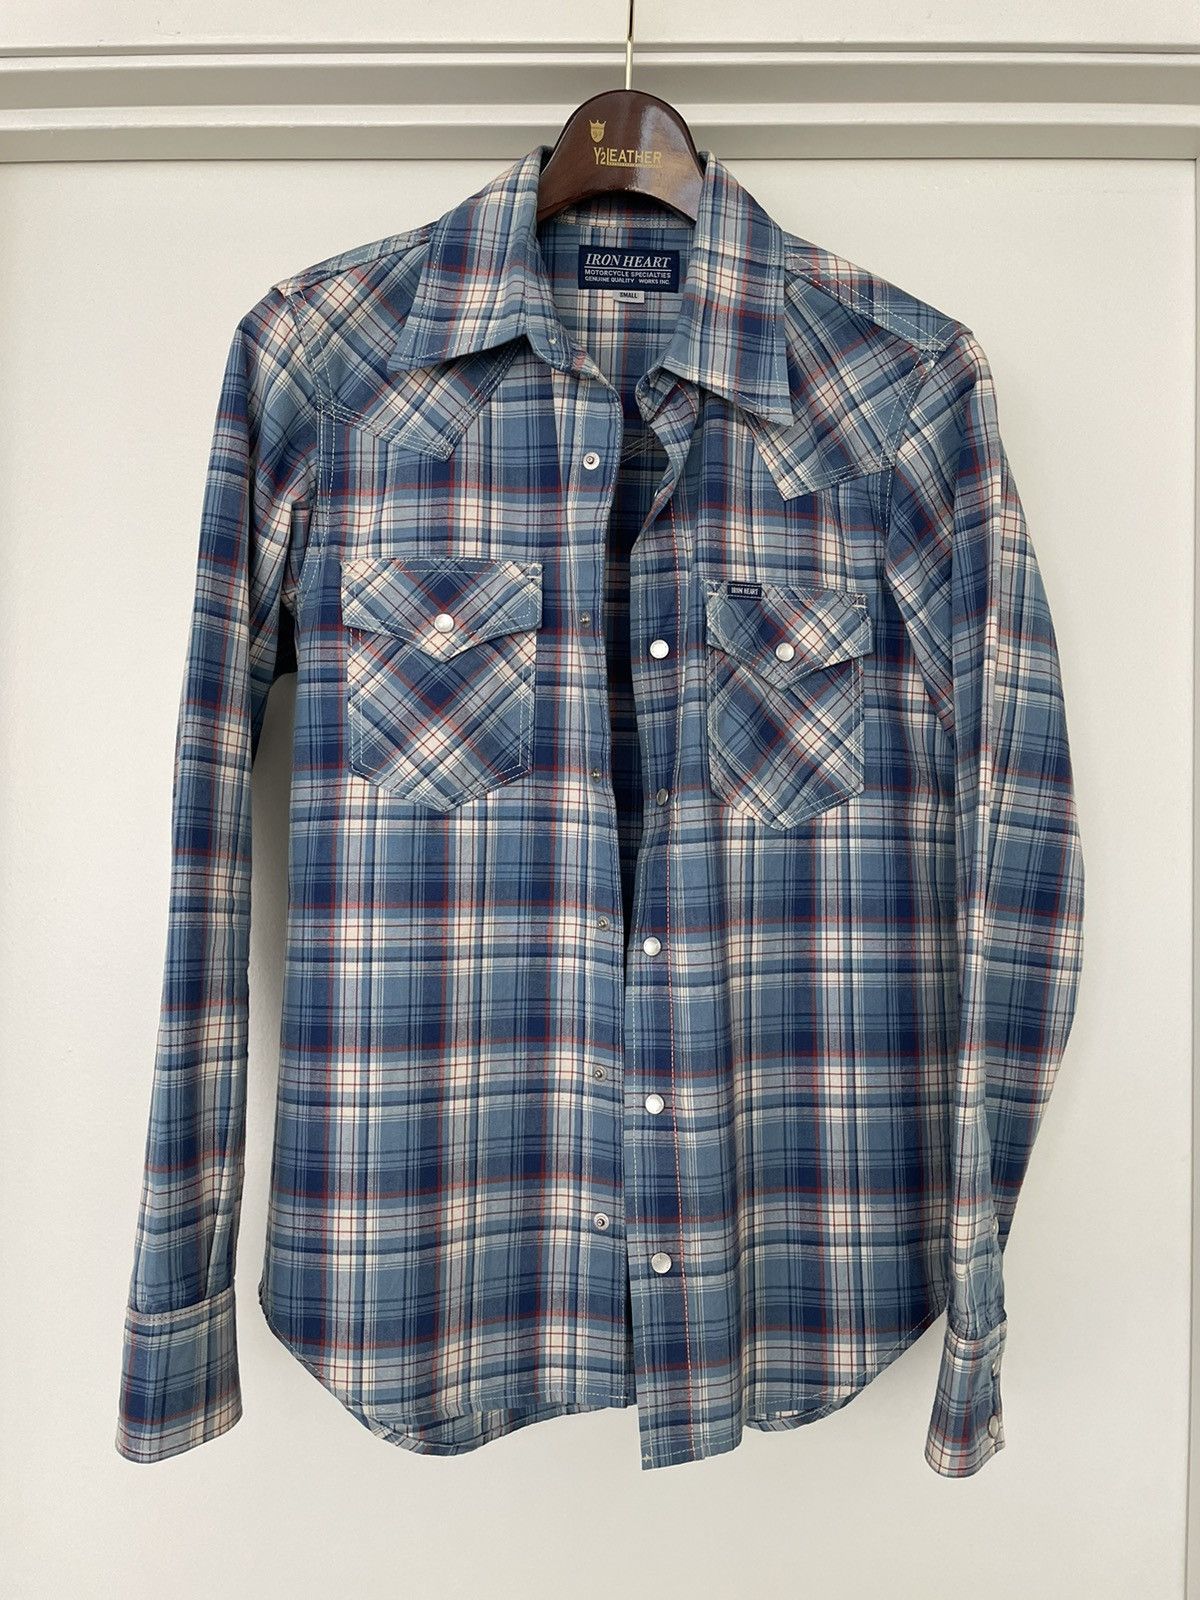 Iron Heart IHSH-220-IND / 5.5oz Selvedge Madras Check Western | Grailed